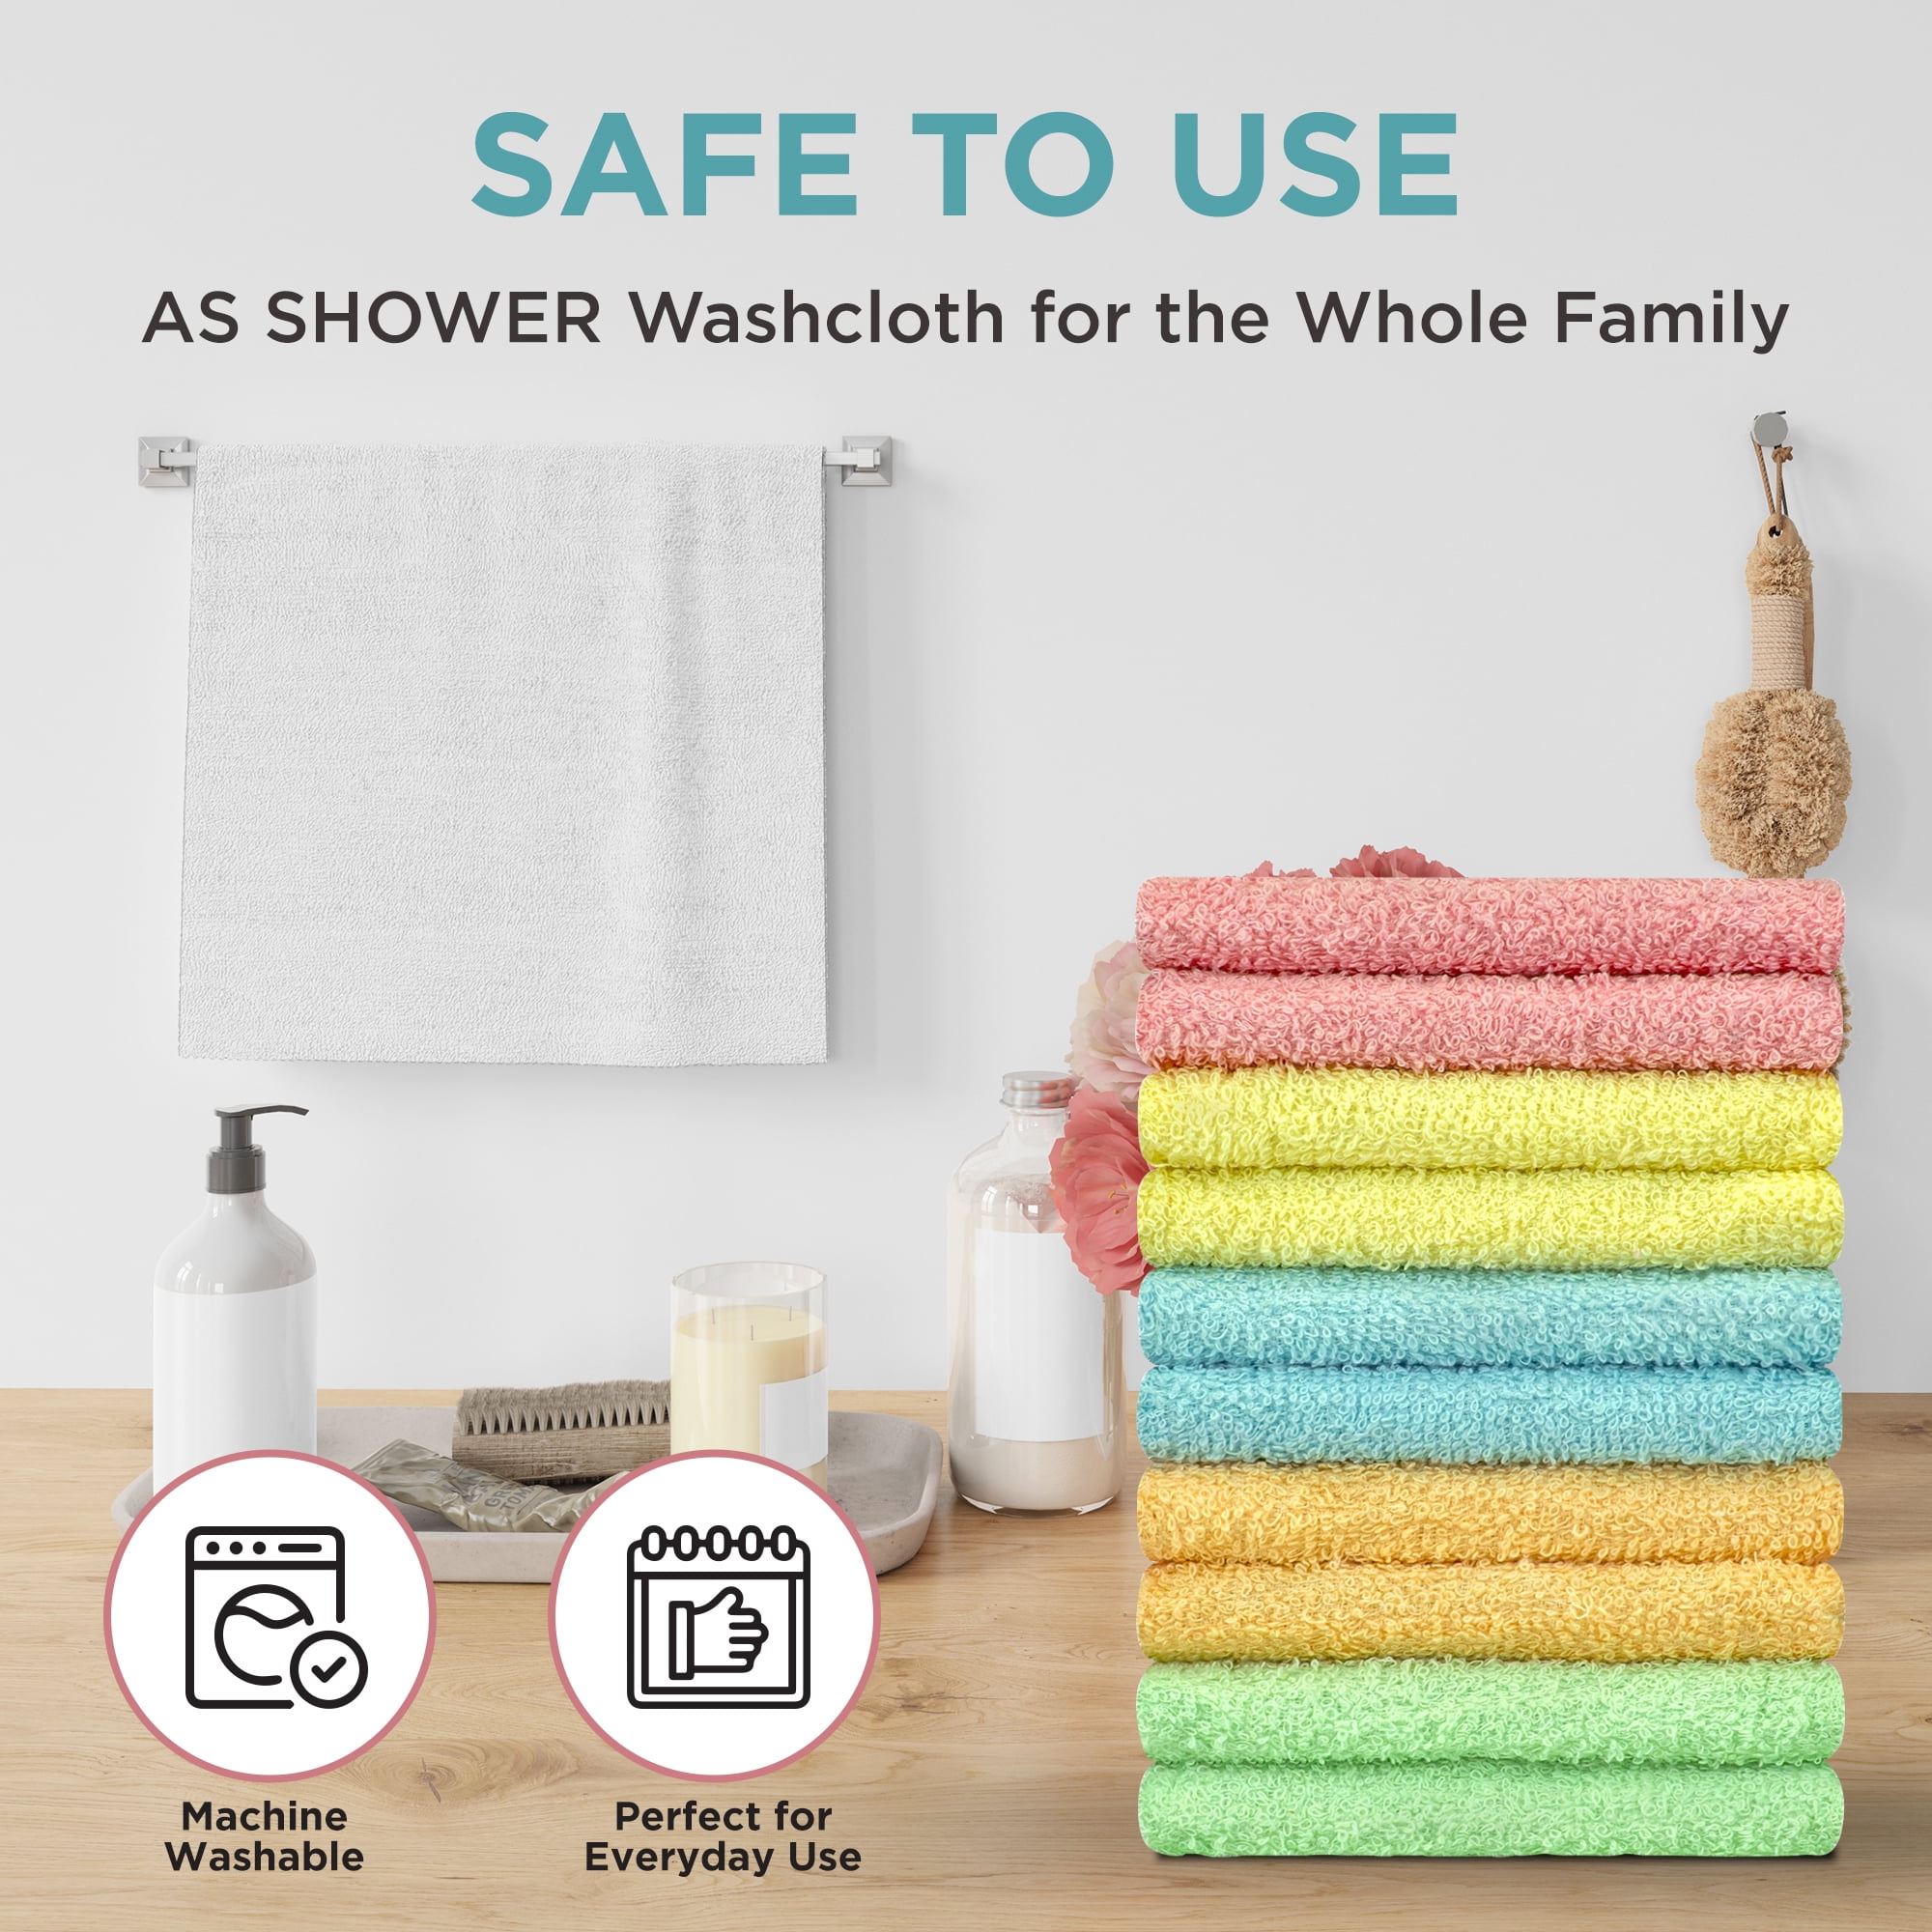 Washcloths, 12 Pack, 100% Extra Soft Ring Spun Cotton Wash Cloth, Size 13 inch x 13 inch, Soft and Absorbent, Machine Washable, Vibrant Assorted